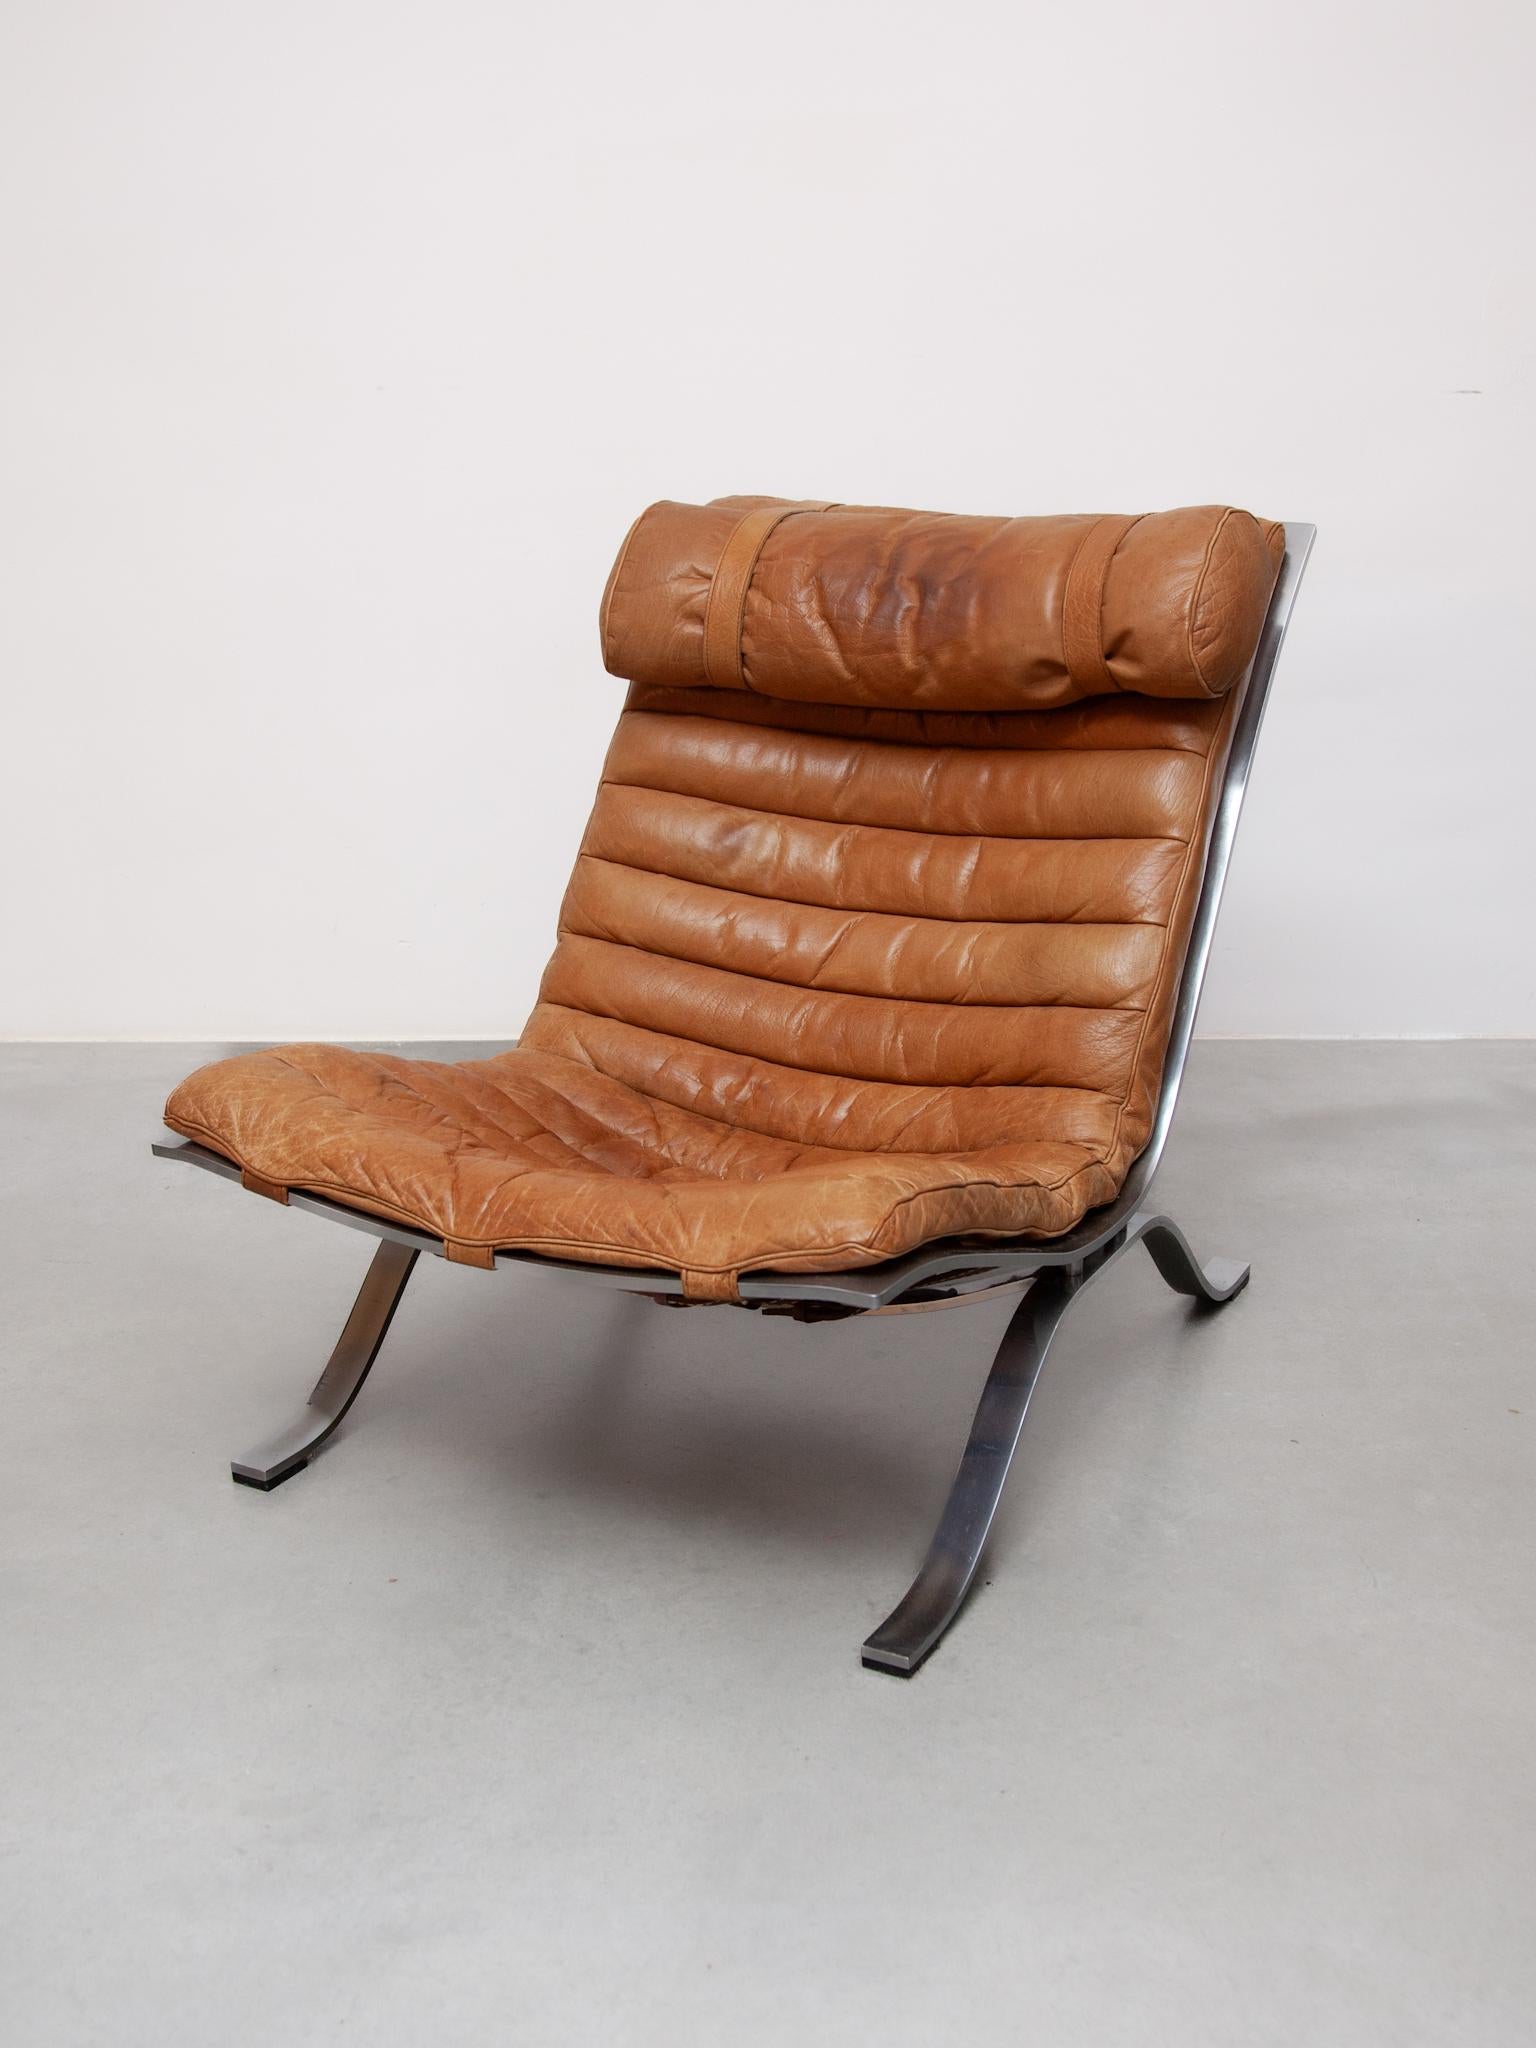 A beautiful lounge chair designed in the the sixties by Arne Norell for Norell Mobel. This is a classic and striking combi of materials, the frame is made of two curves of chrome-plated steel. The leather in combi with the chromed steel creates a